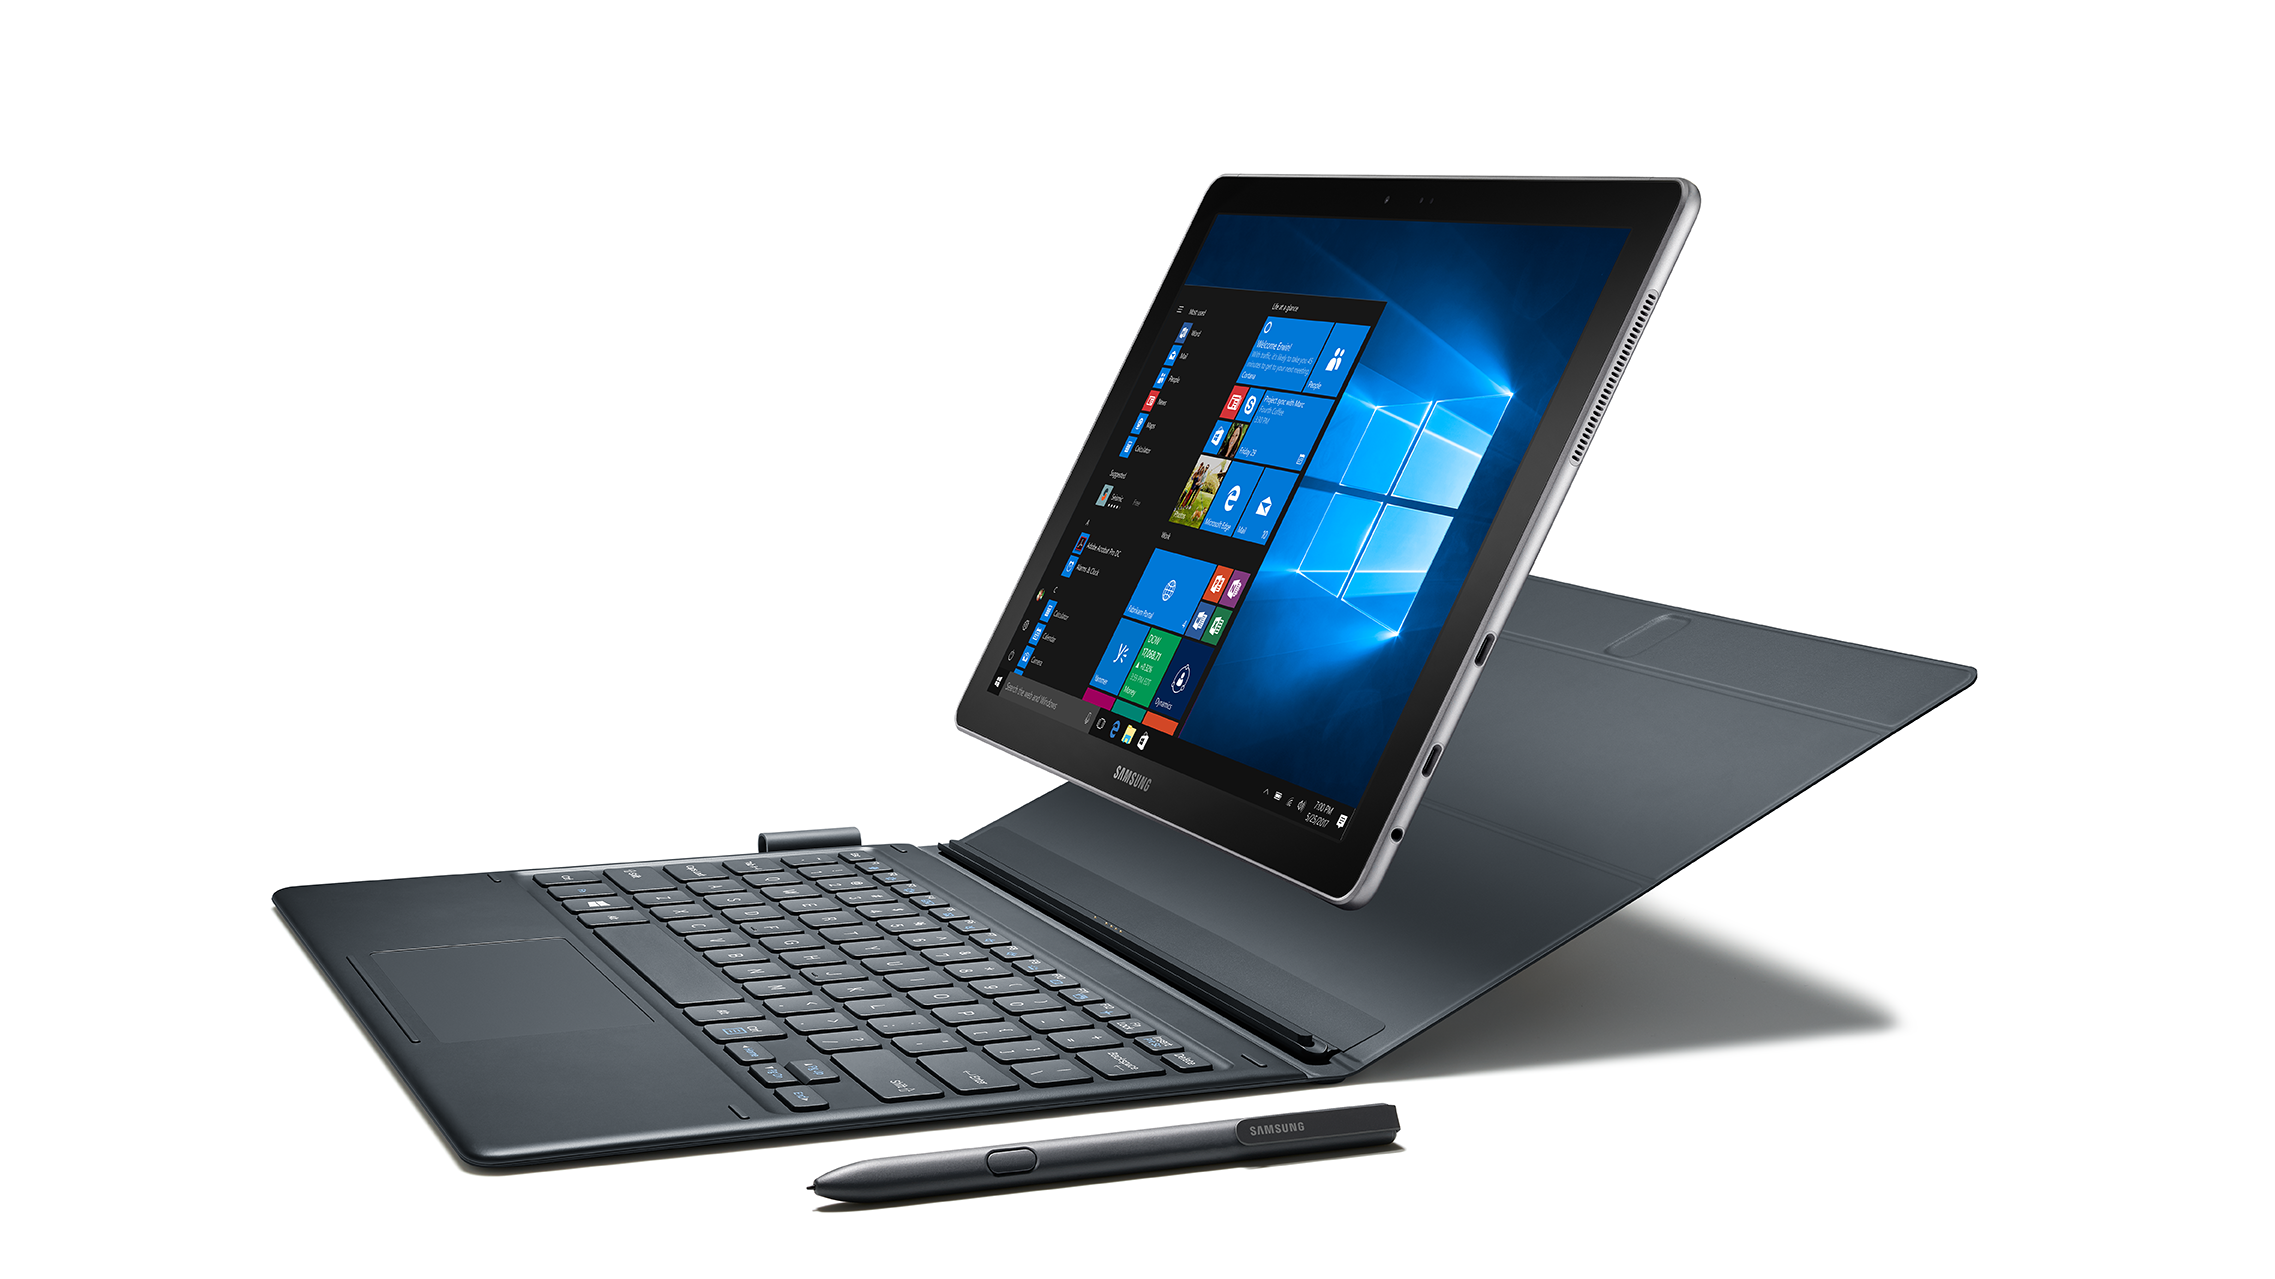 Samsung Delivers Stylish and Powerful Enterprise 2in1 Solution with Galaxy Book 12 Samsung